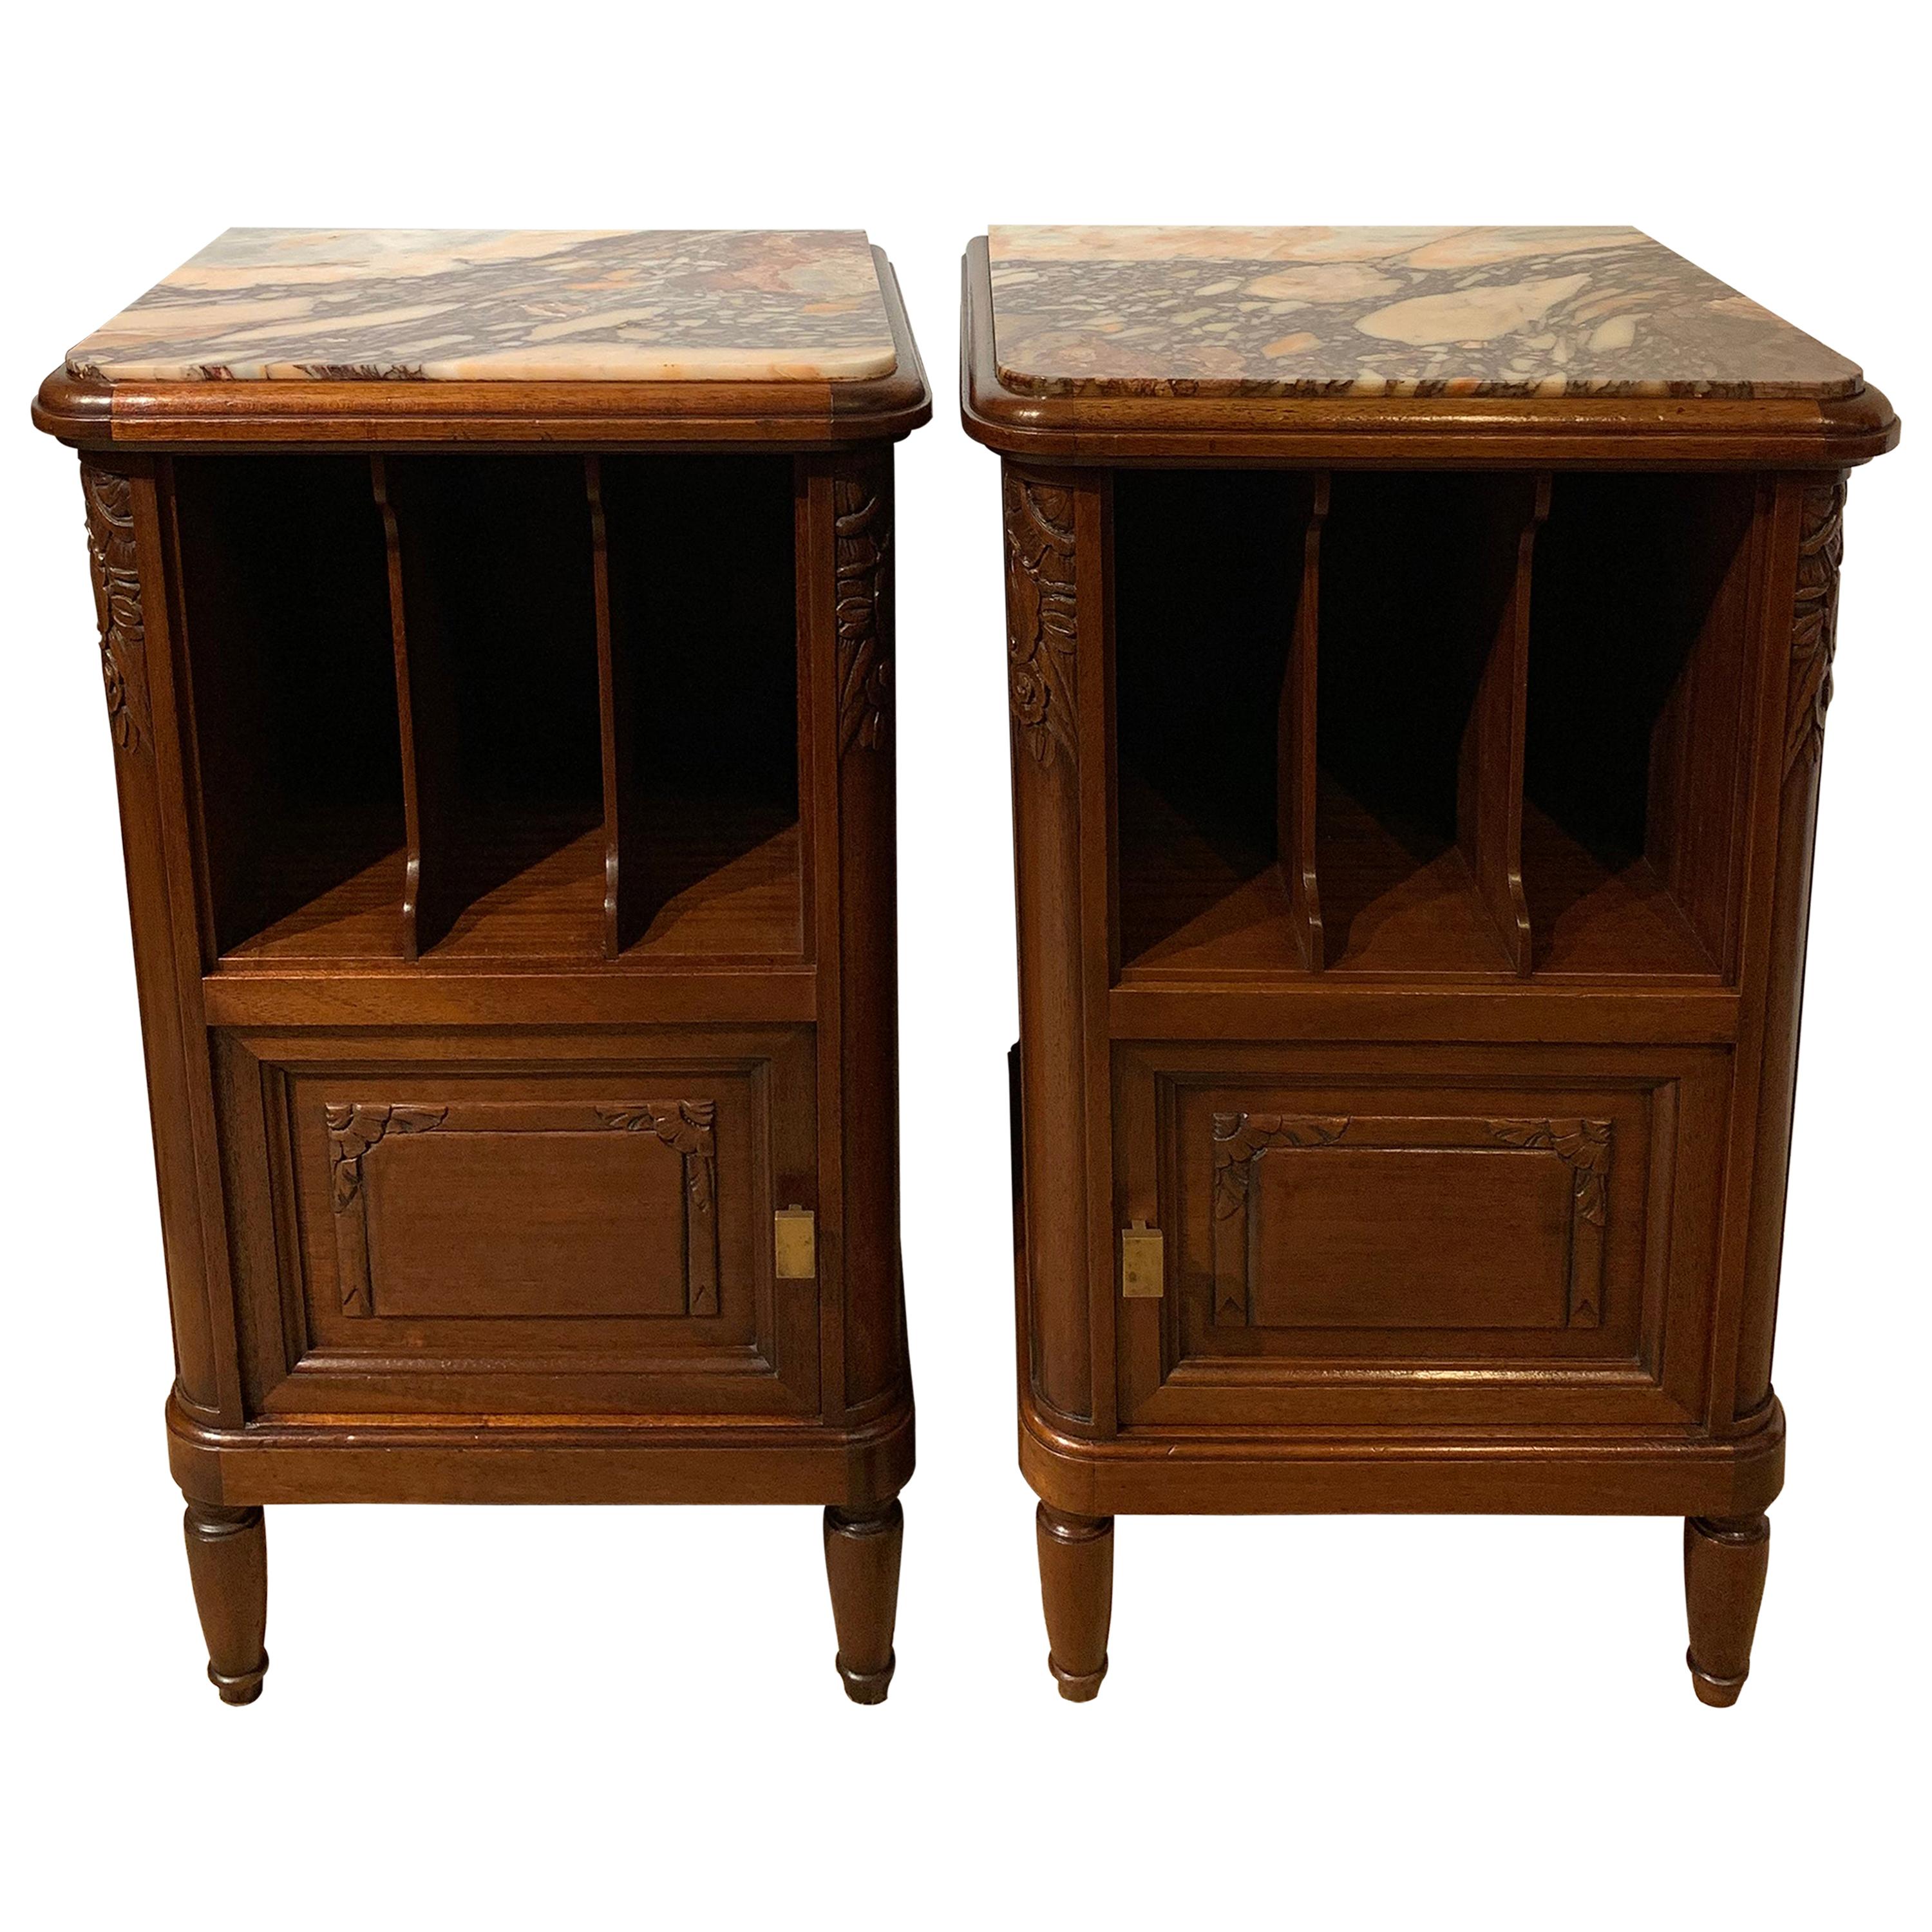 Pair of Bedside Cabinets / Nightstands